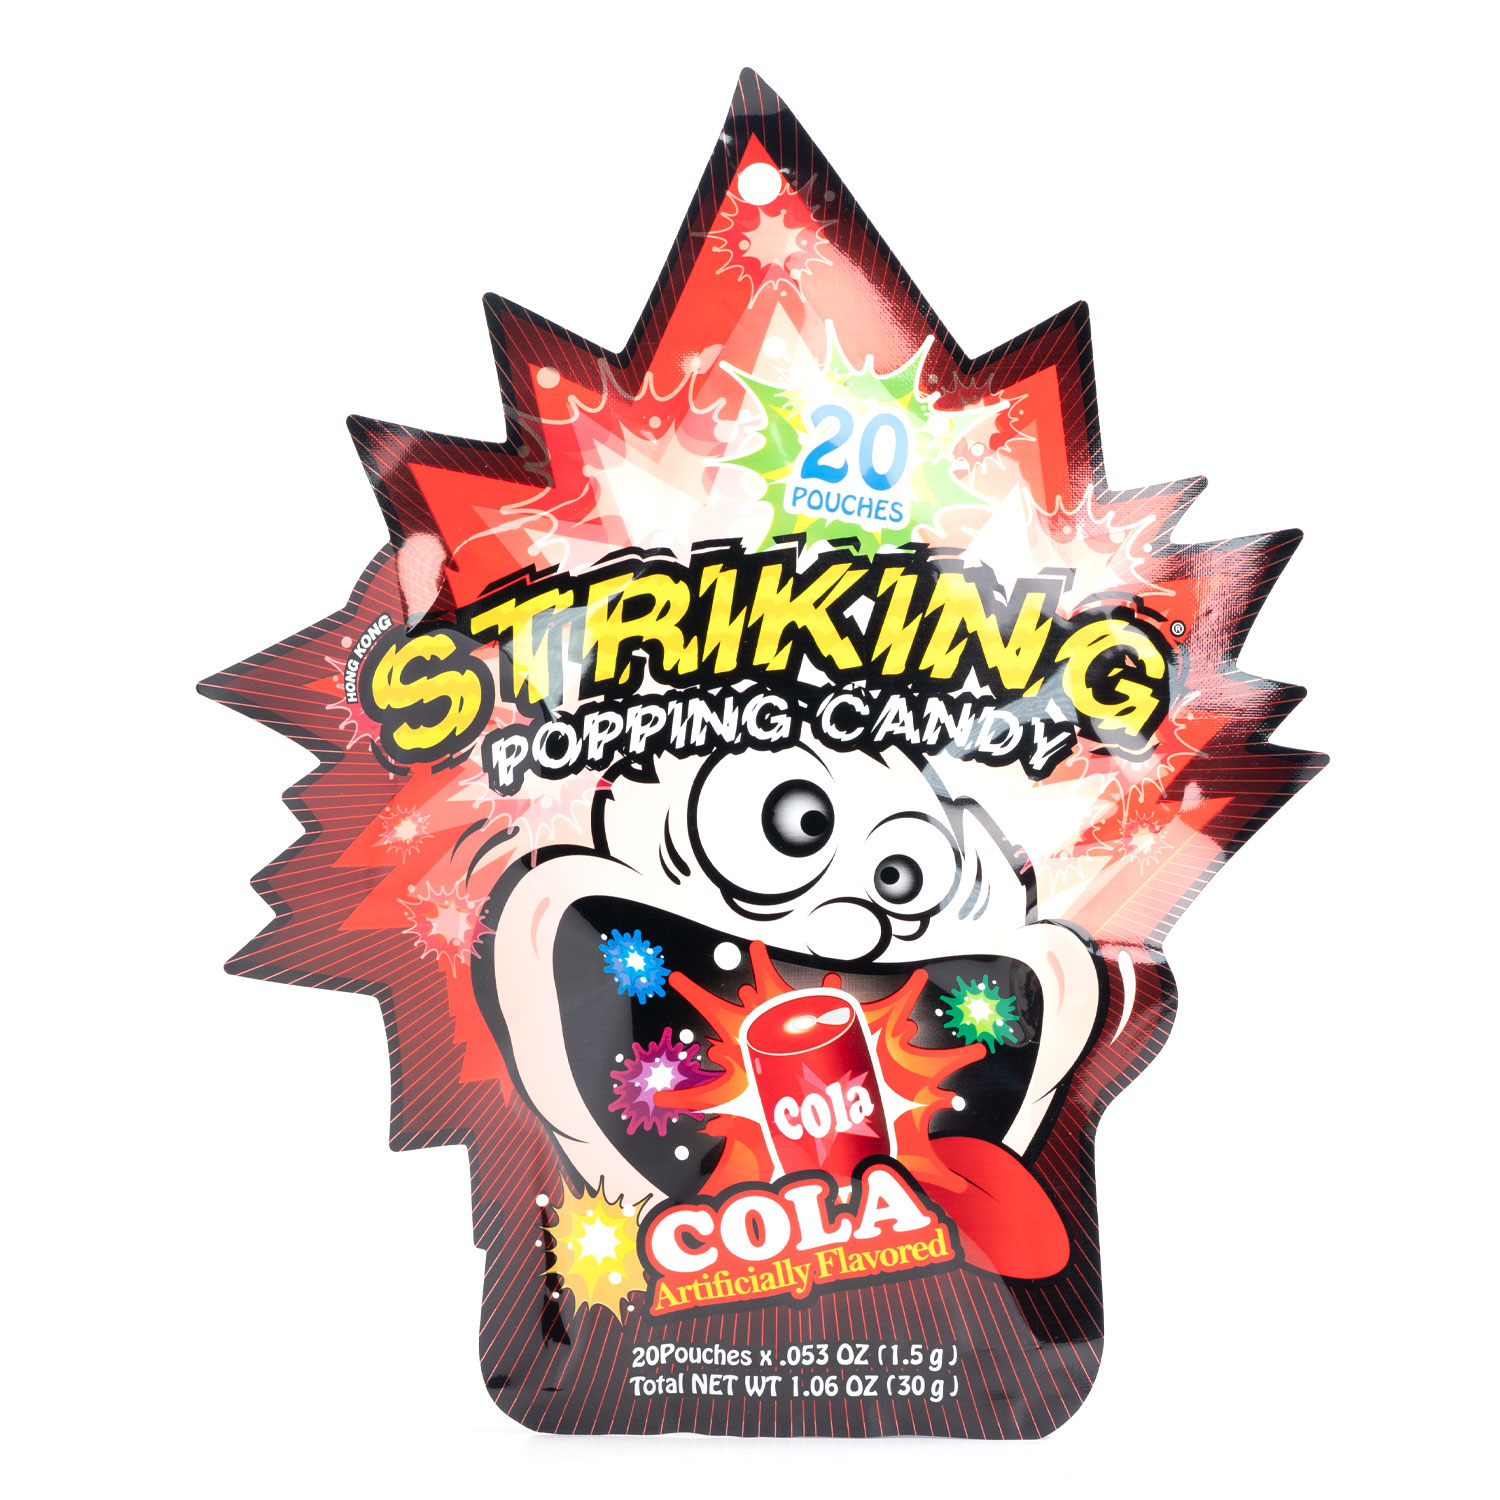 Striking Popping Candy